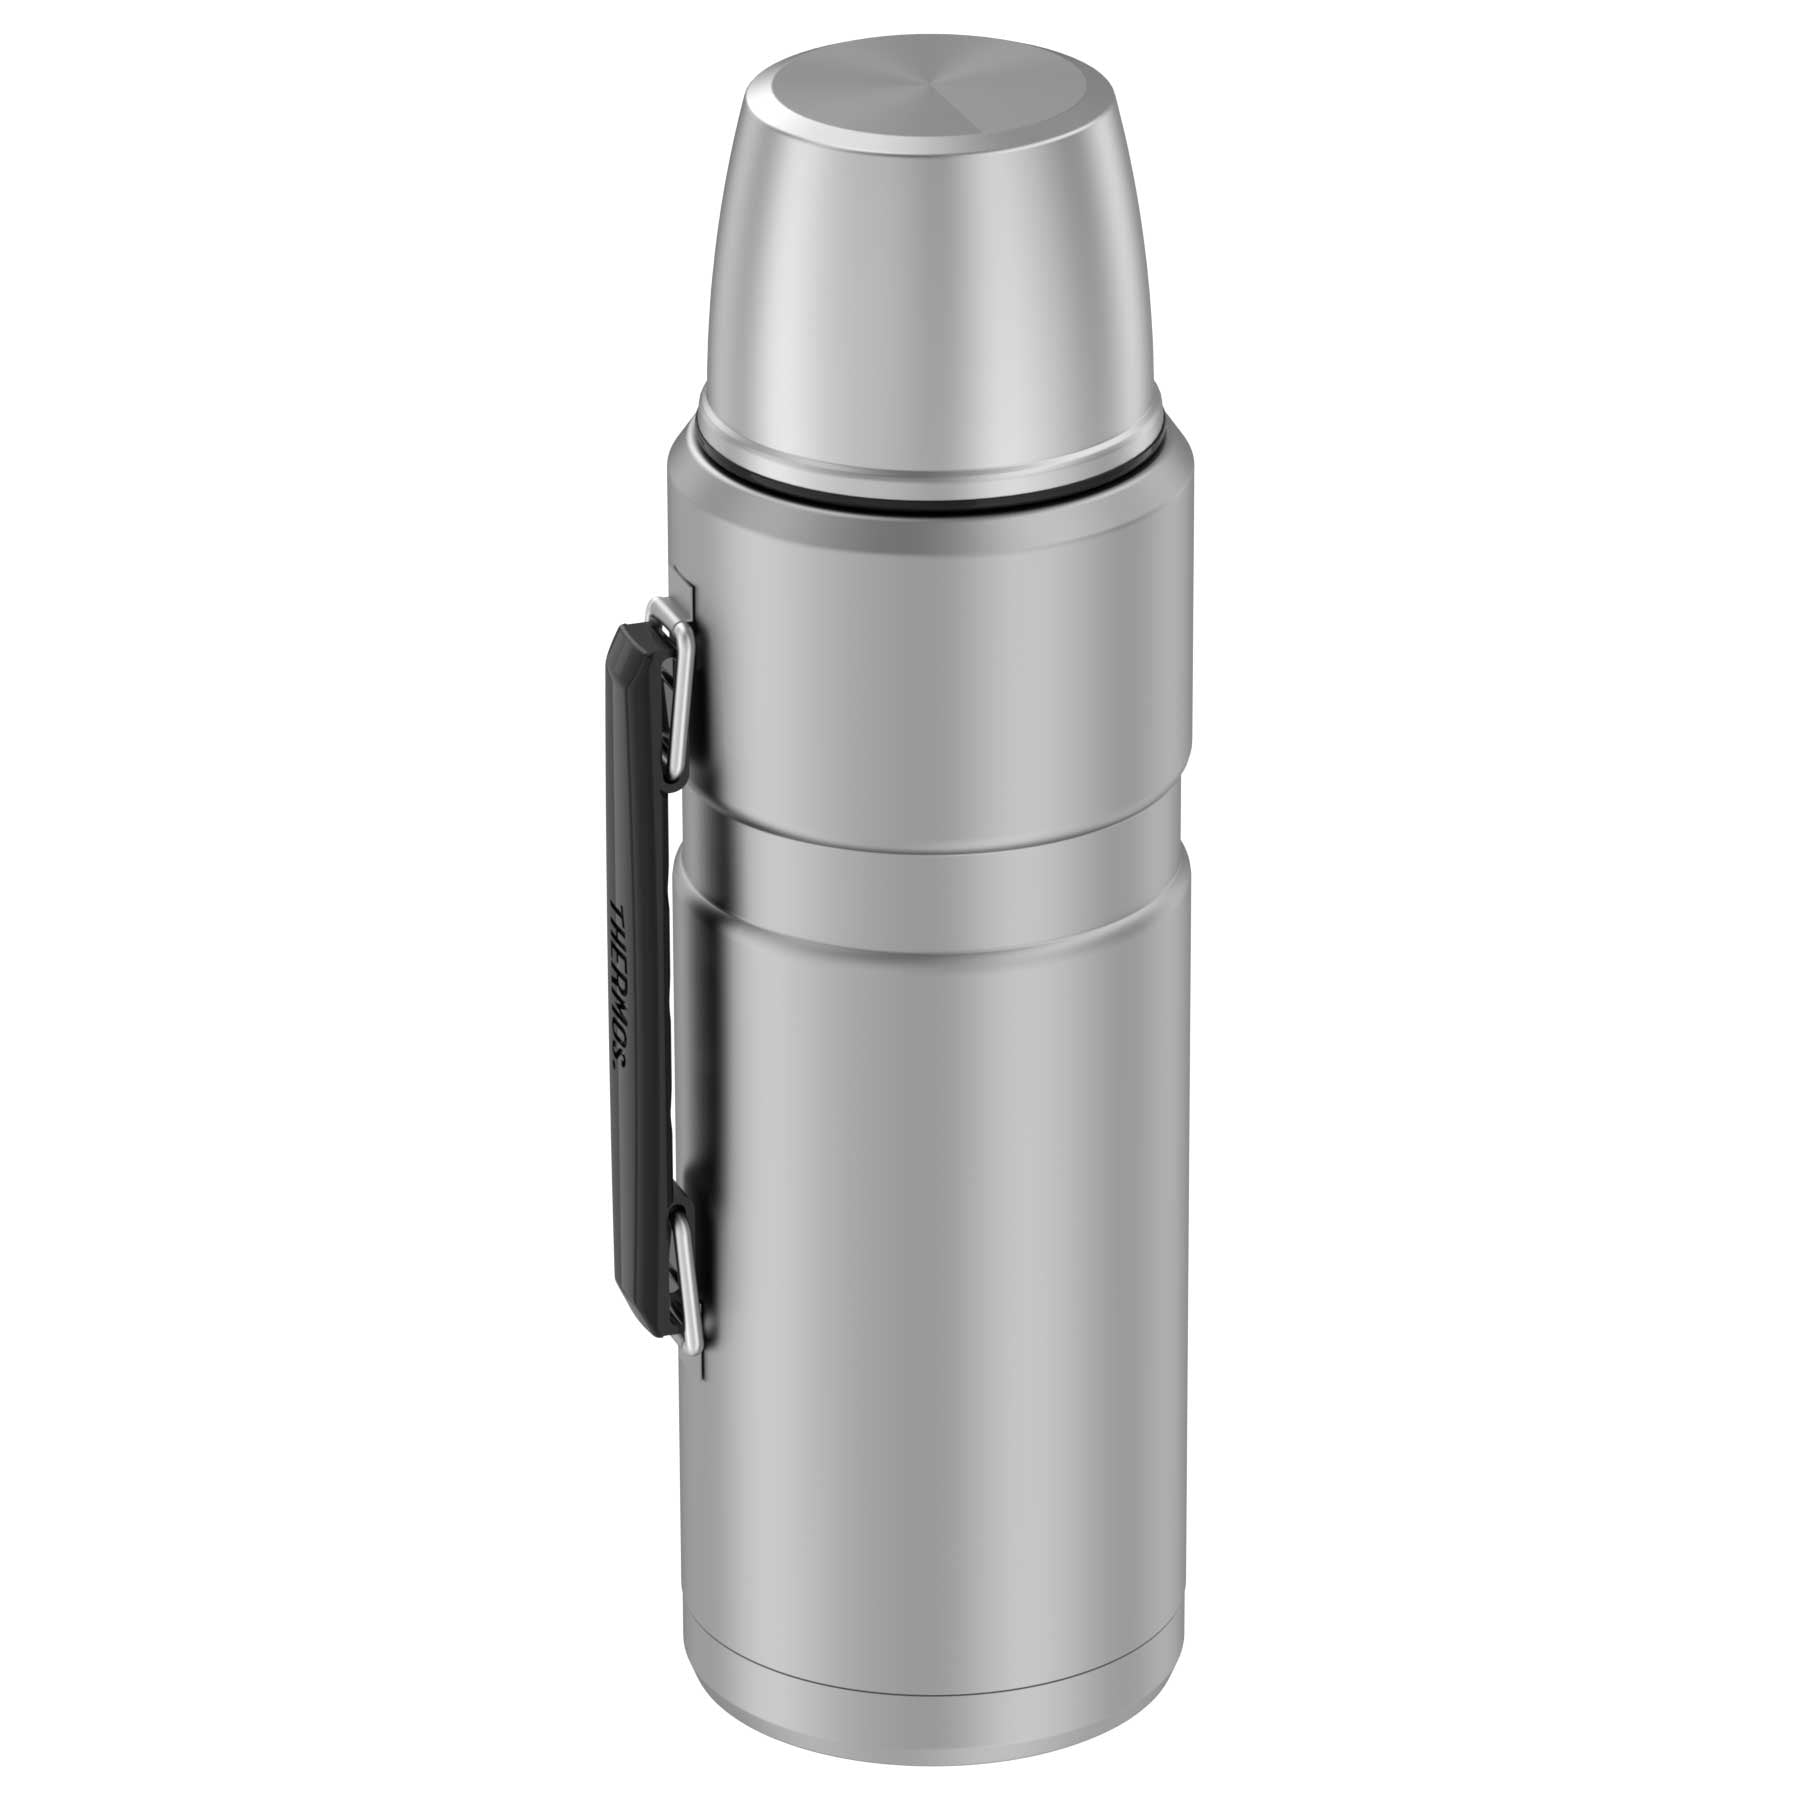 Thermos Sk2020mdb4 Stainless King Beverage Bottle - 2L - Blue